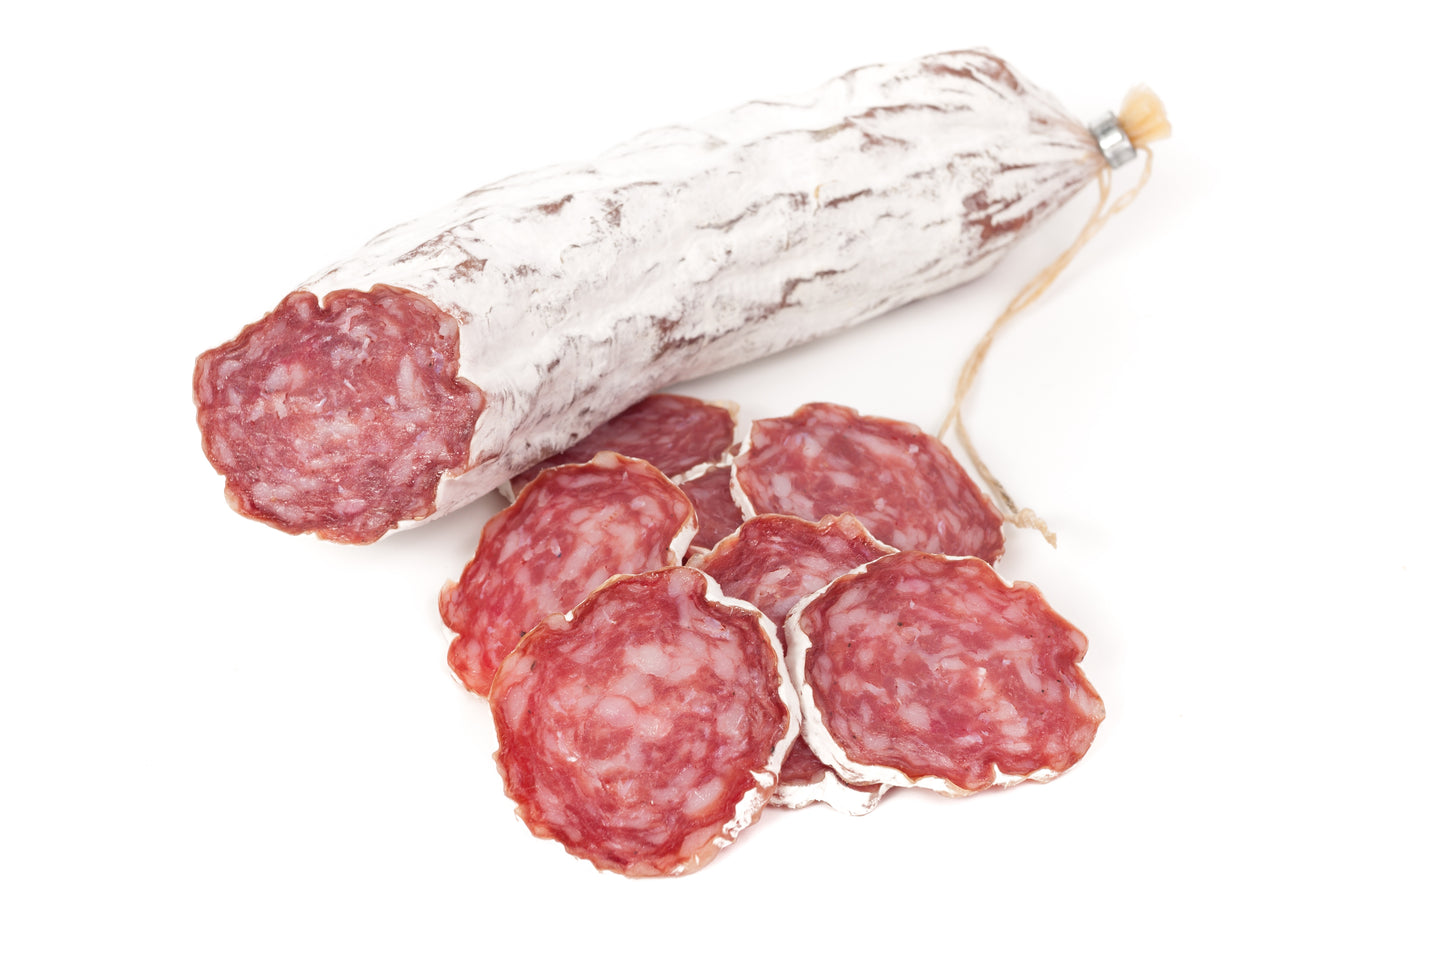 cured sausage on a white background